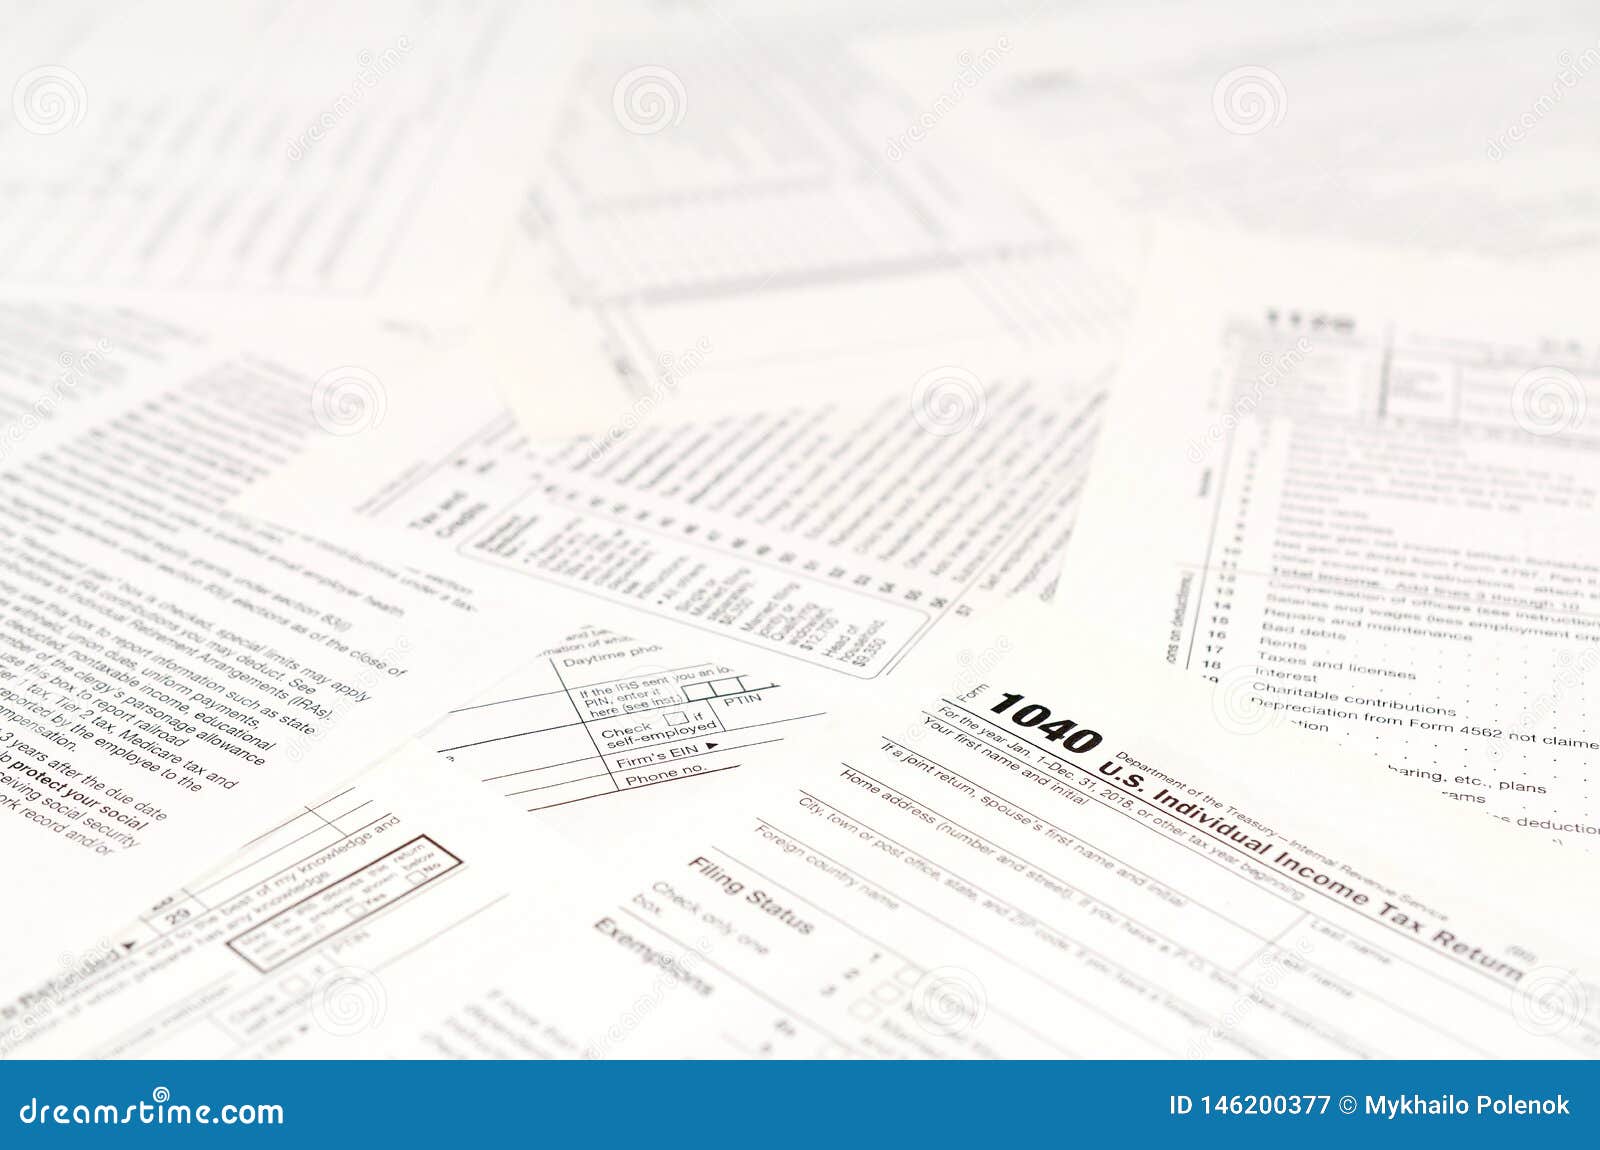 blank-income-tax-forms-american-1040-individual-income-tax-return-form